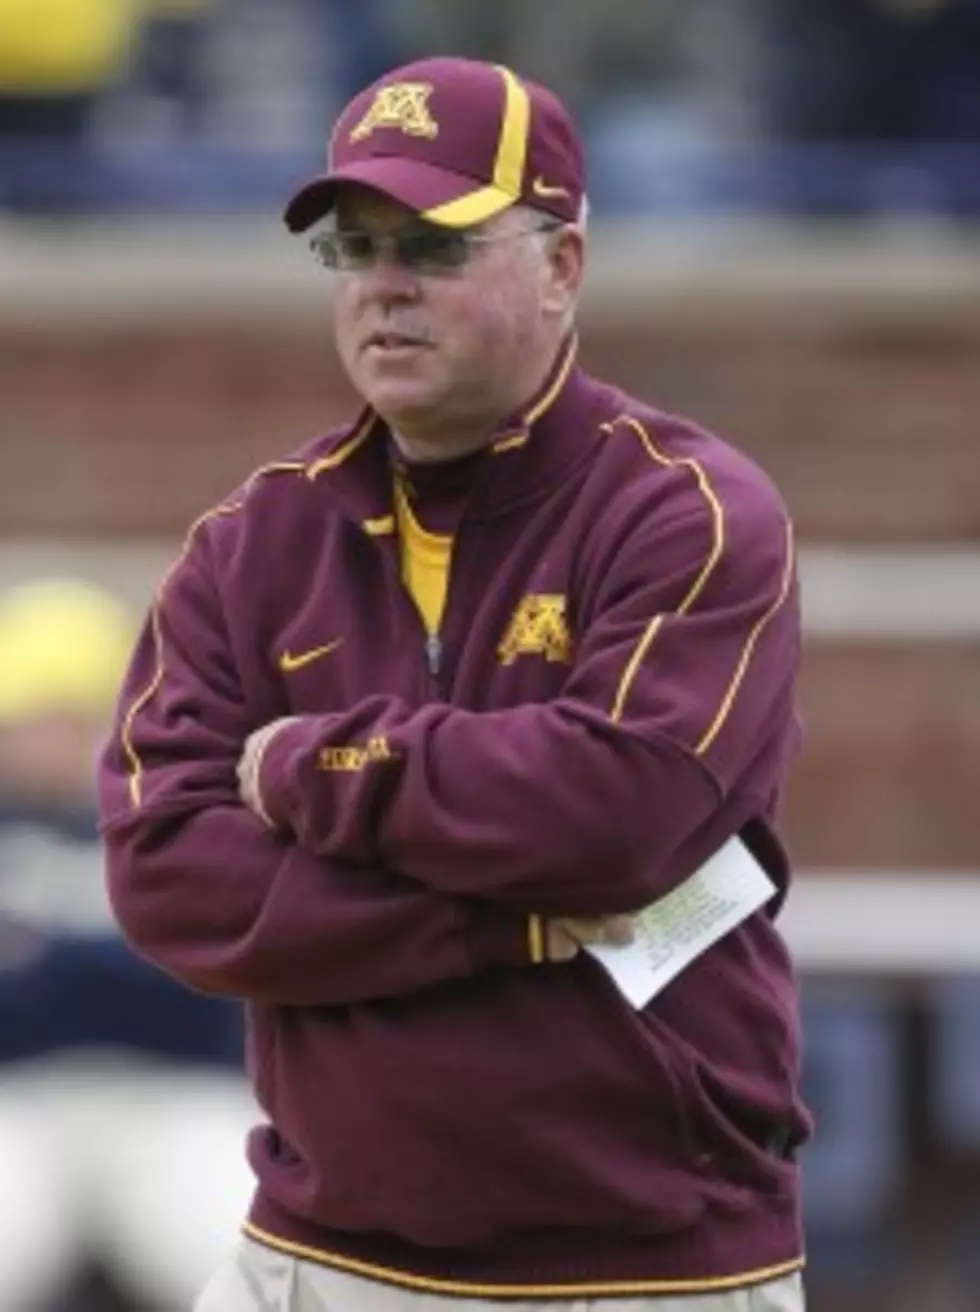 Can Gophers Take Next Step?